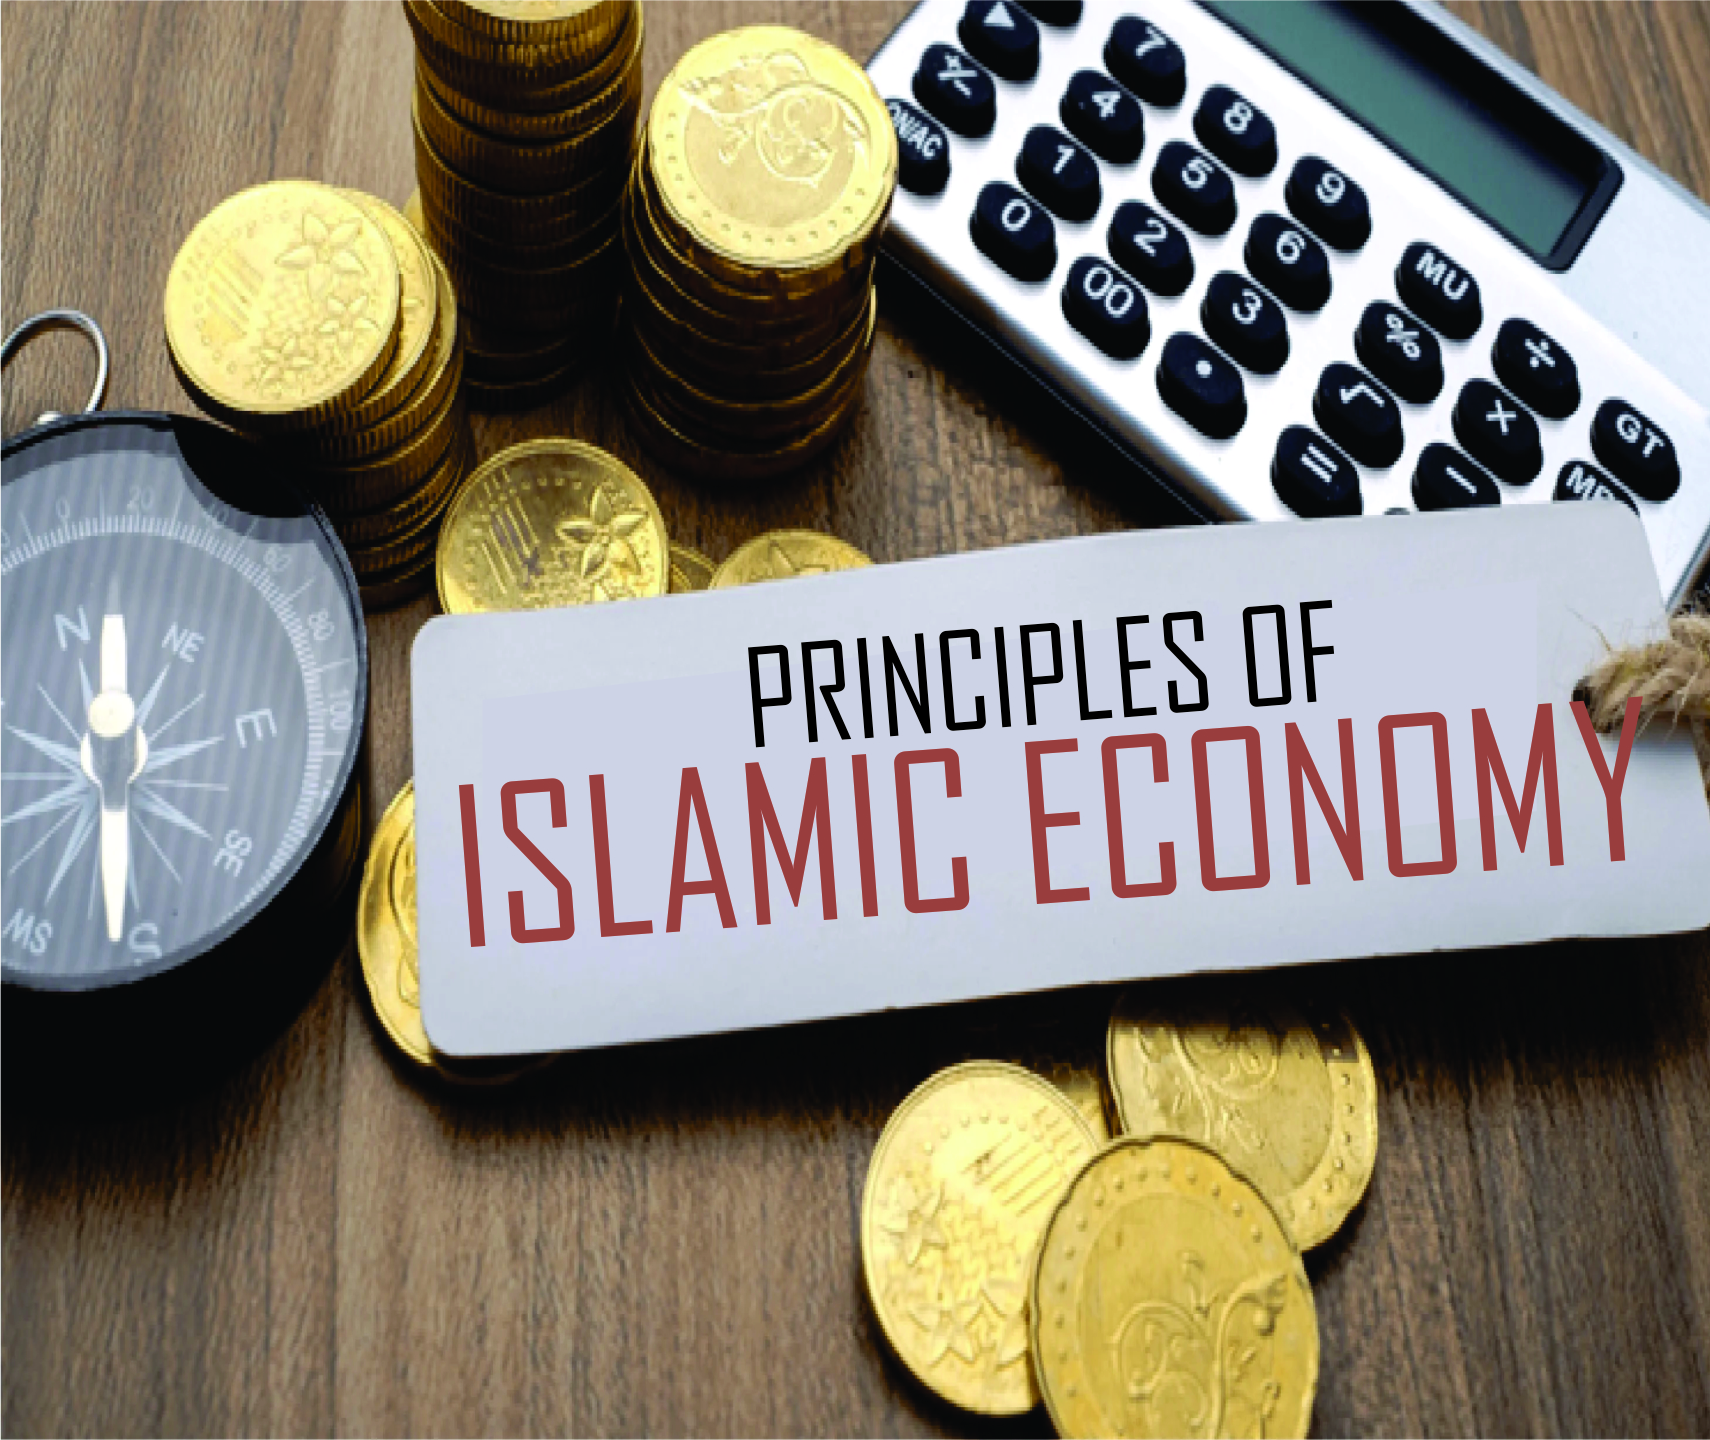 You are currently viewing Principles of Islamic Economy